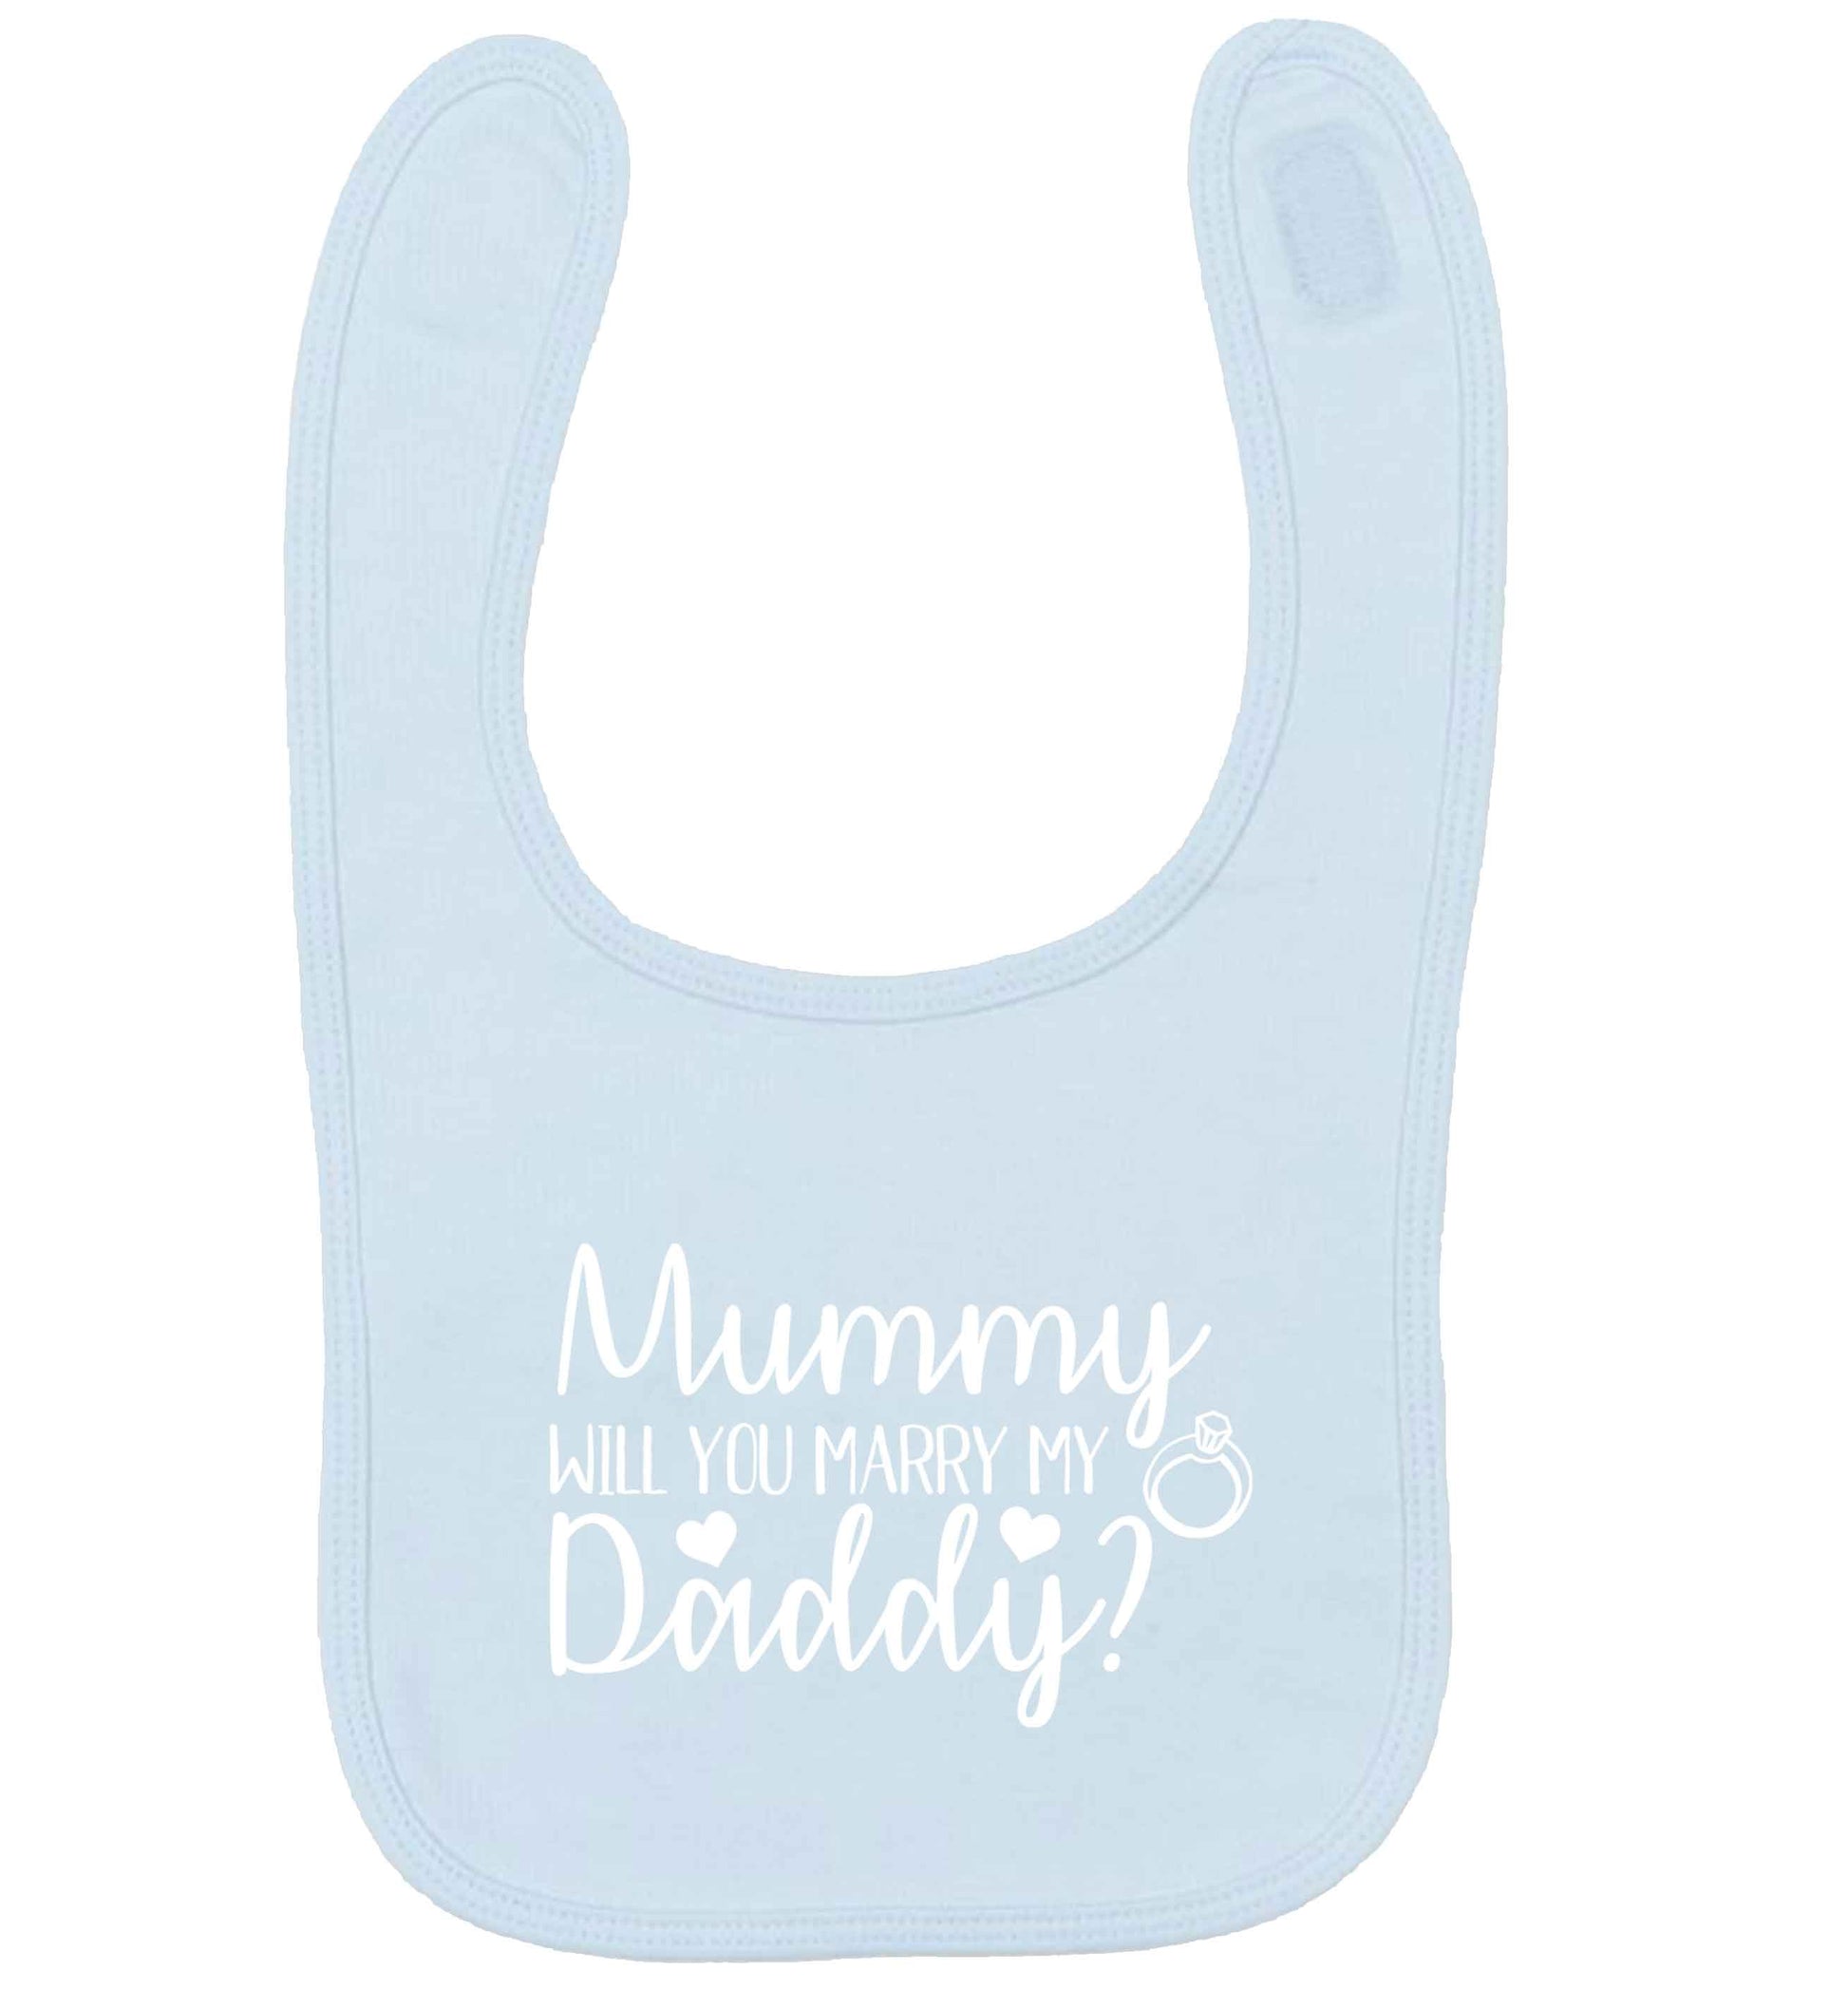 Looking for a unique way to pop the question? Why not let your kids do it!  pale blue baby bib